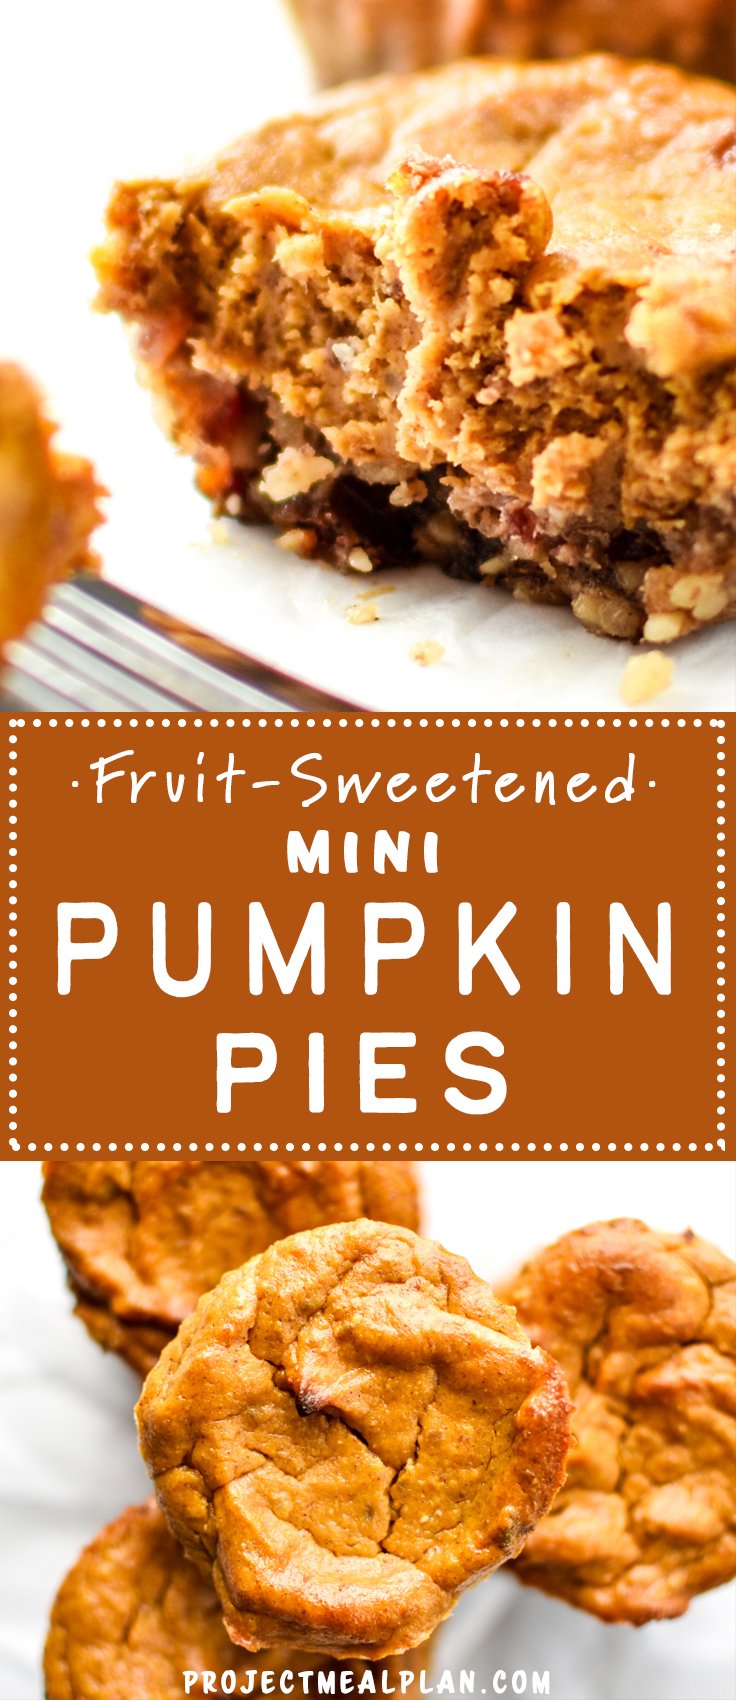 Fruit-Sweetened Mini Pumpkin Pies - Super adorable, creamy and delicious, not to mention both the crust and filling have no sugar added! Try this classic dessert in an easy to hold, pop-in-your-mouth version! - ProjectMealPlan.com